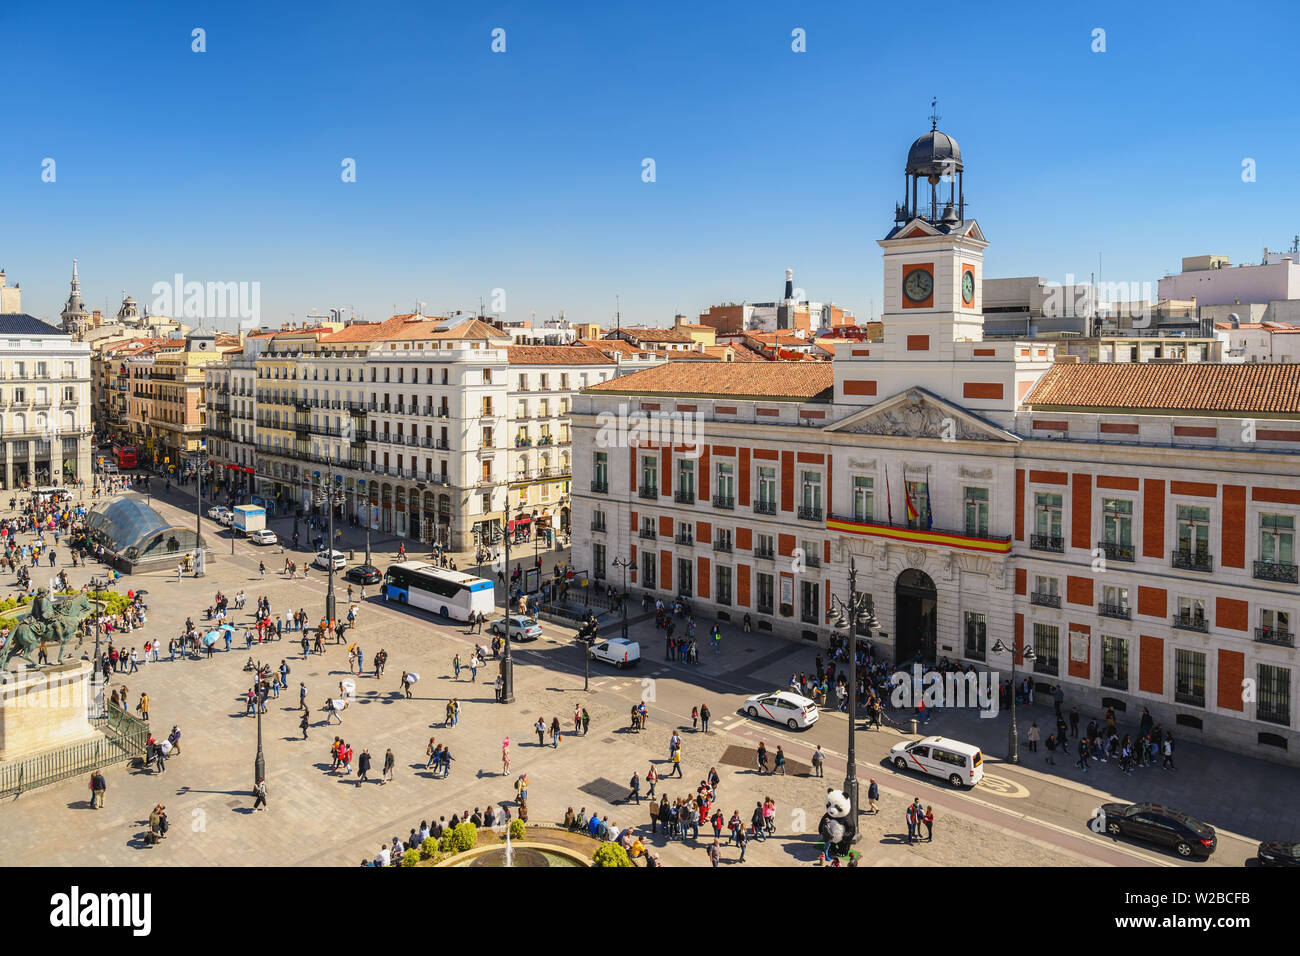 Madrid Spain, aerial view city skyline at Puerta del Sol Stock Photo